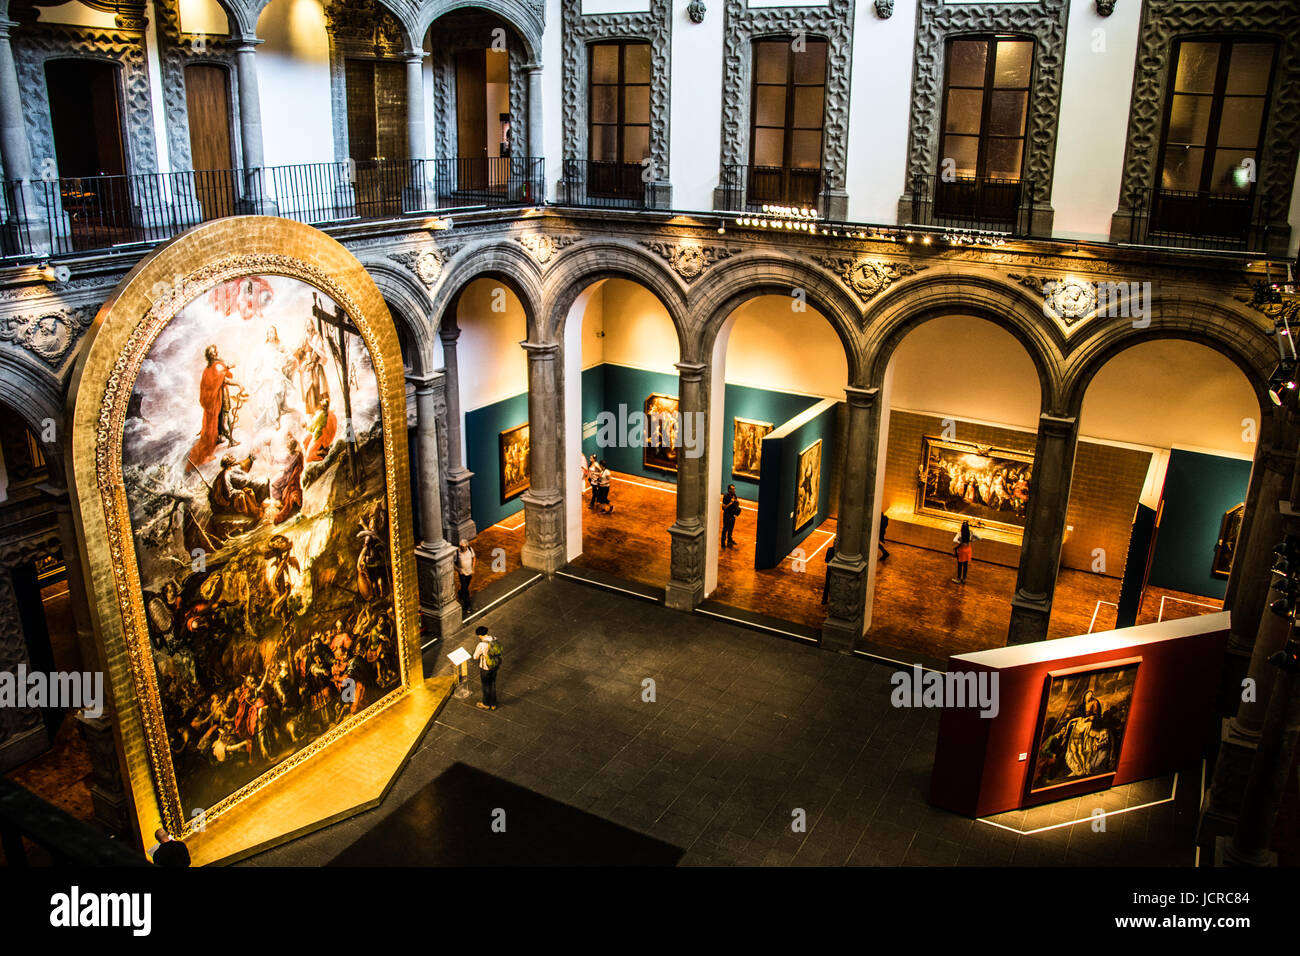 Palace of Iturbide, Central Historic District, Mexico City, Mexico Stock Photo